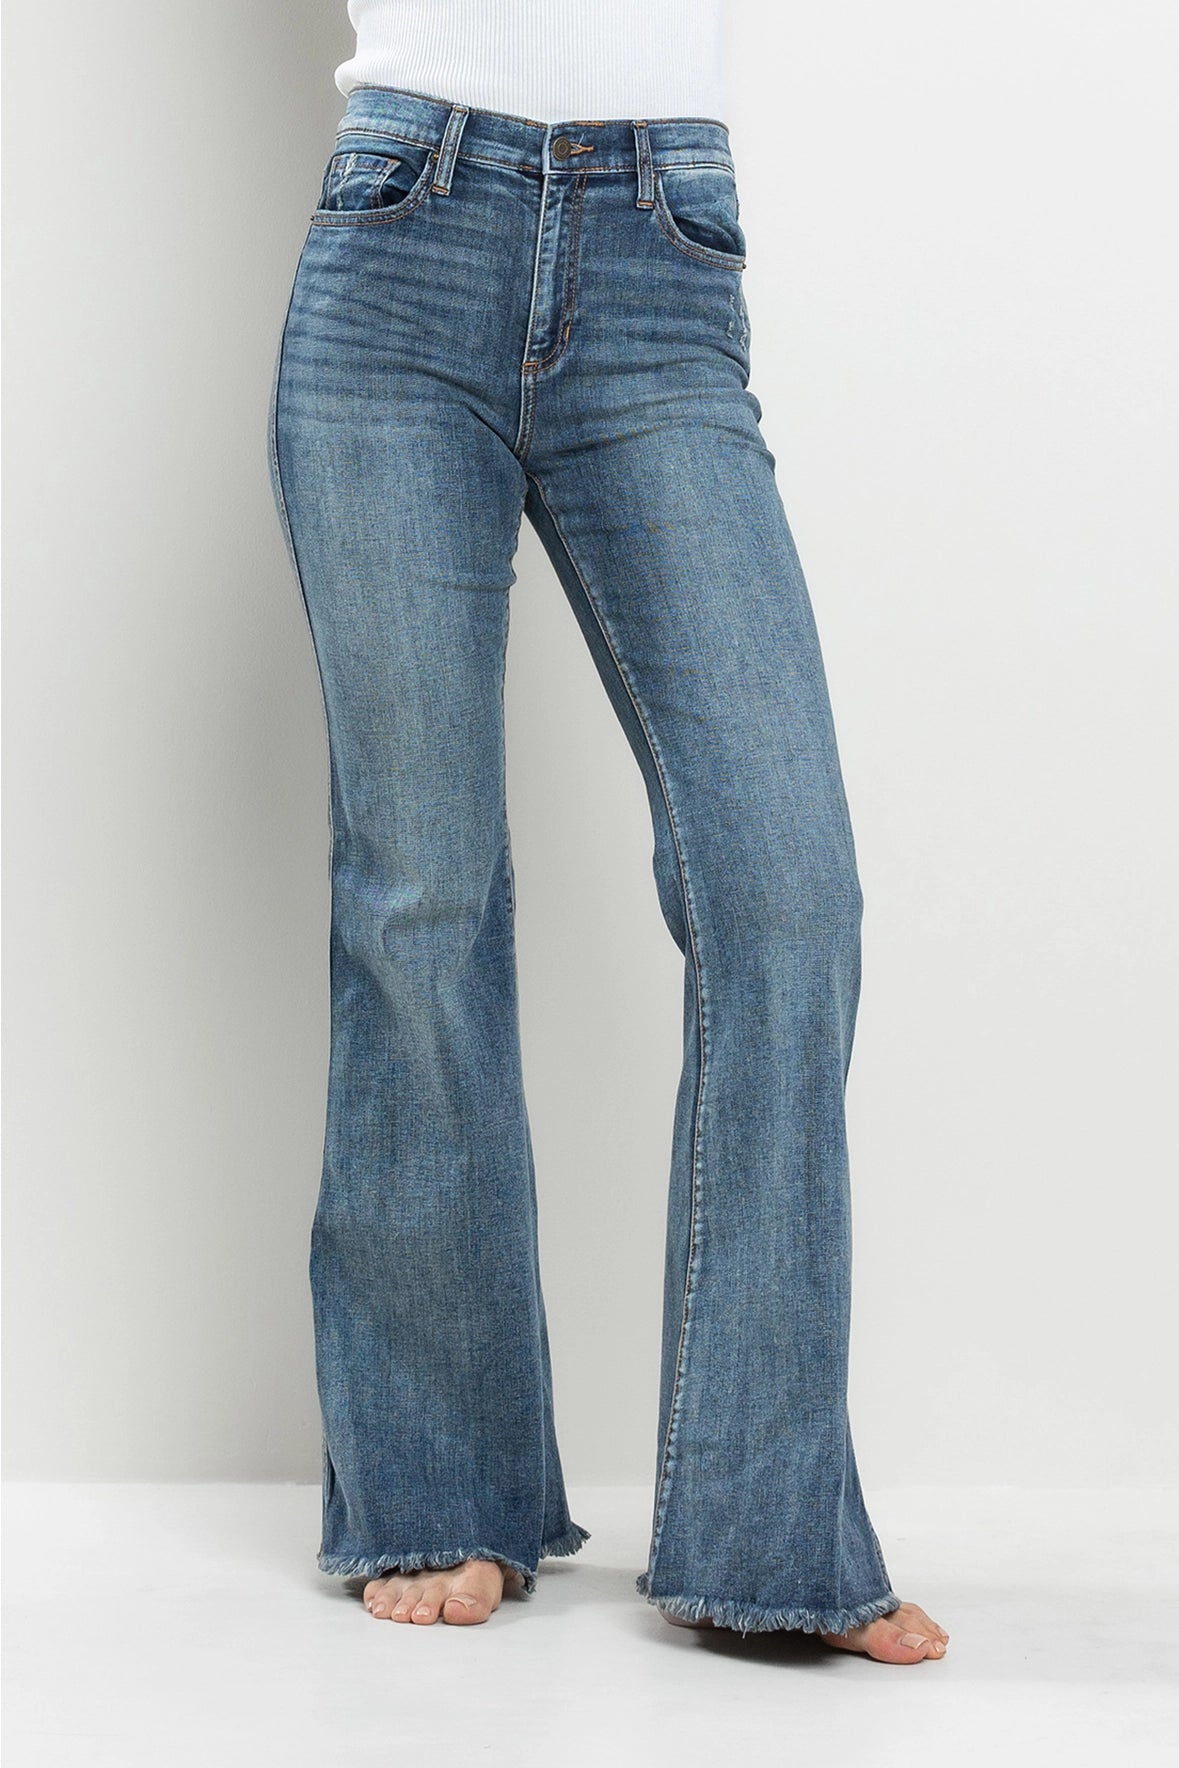 SneakPeek high rise frayed flare jeans